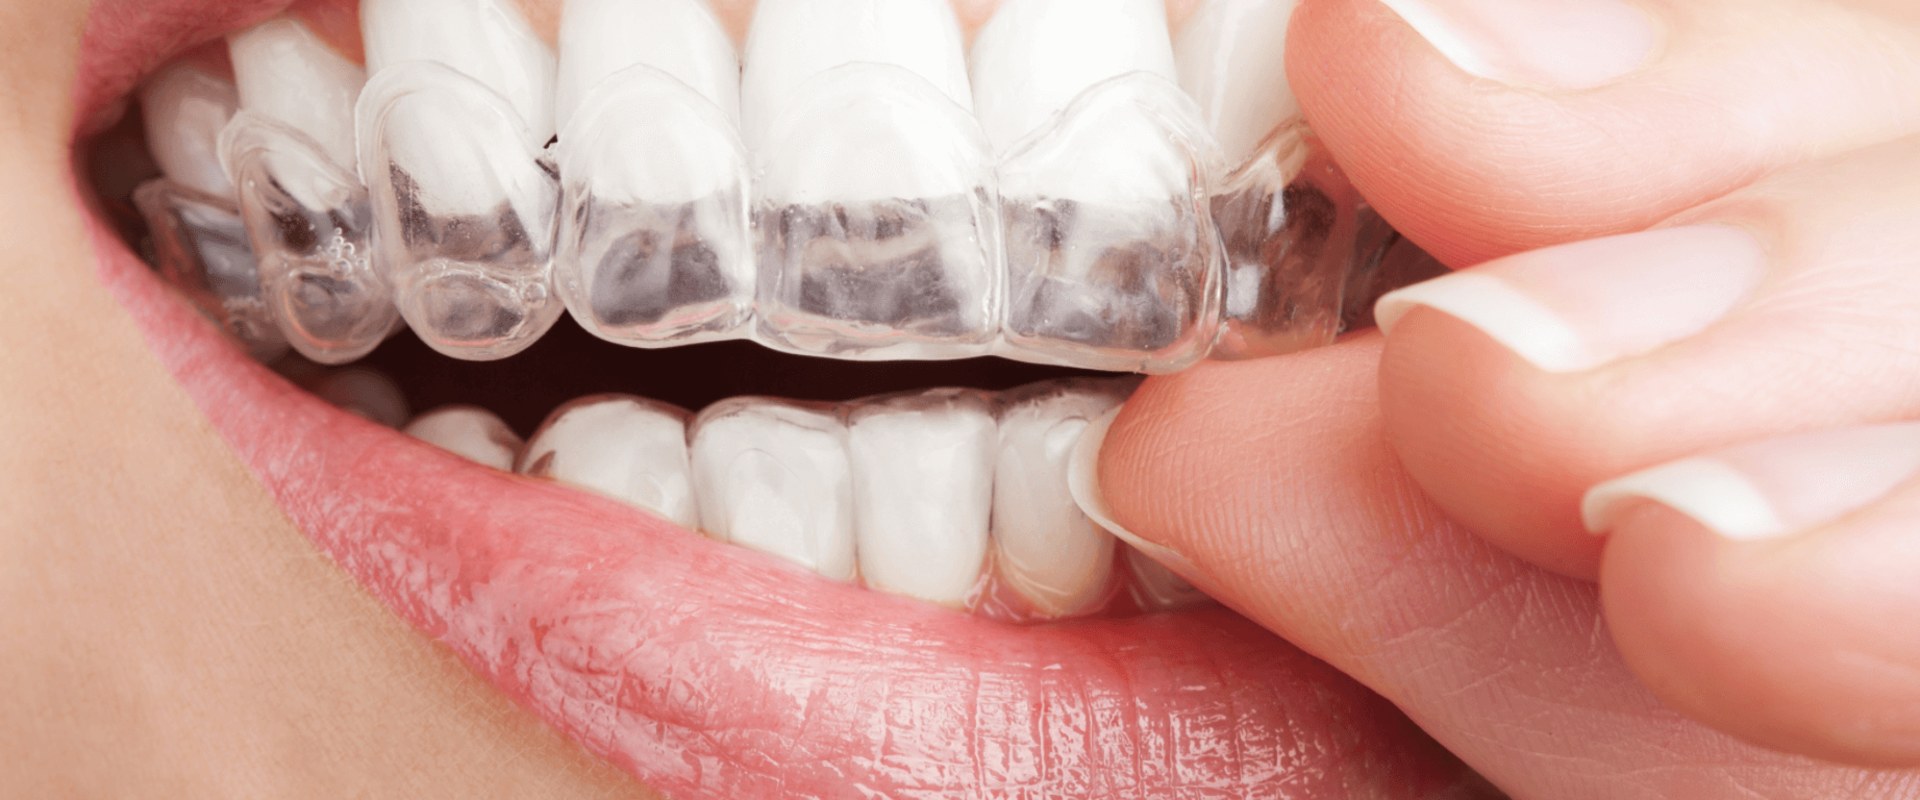 How Often Should You Change Your Invisalign Aligners During Treatment?